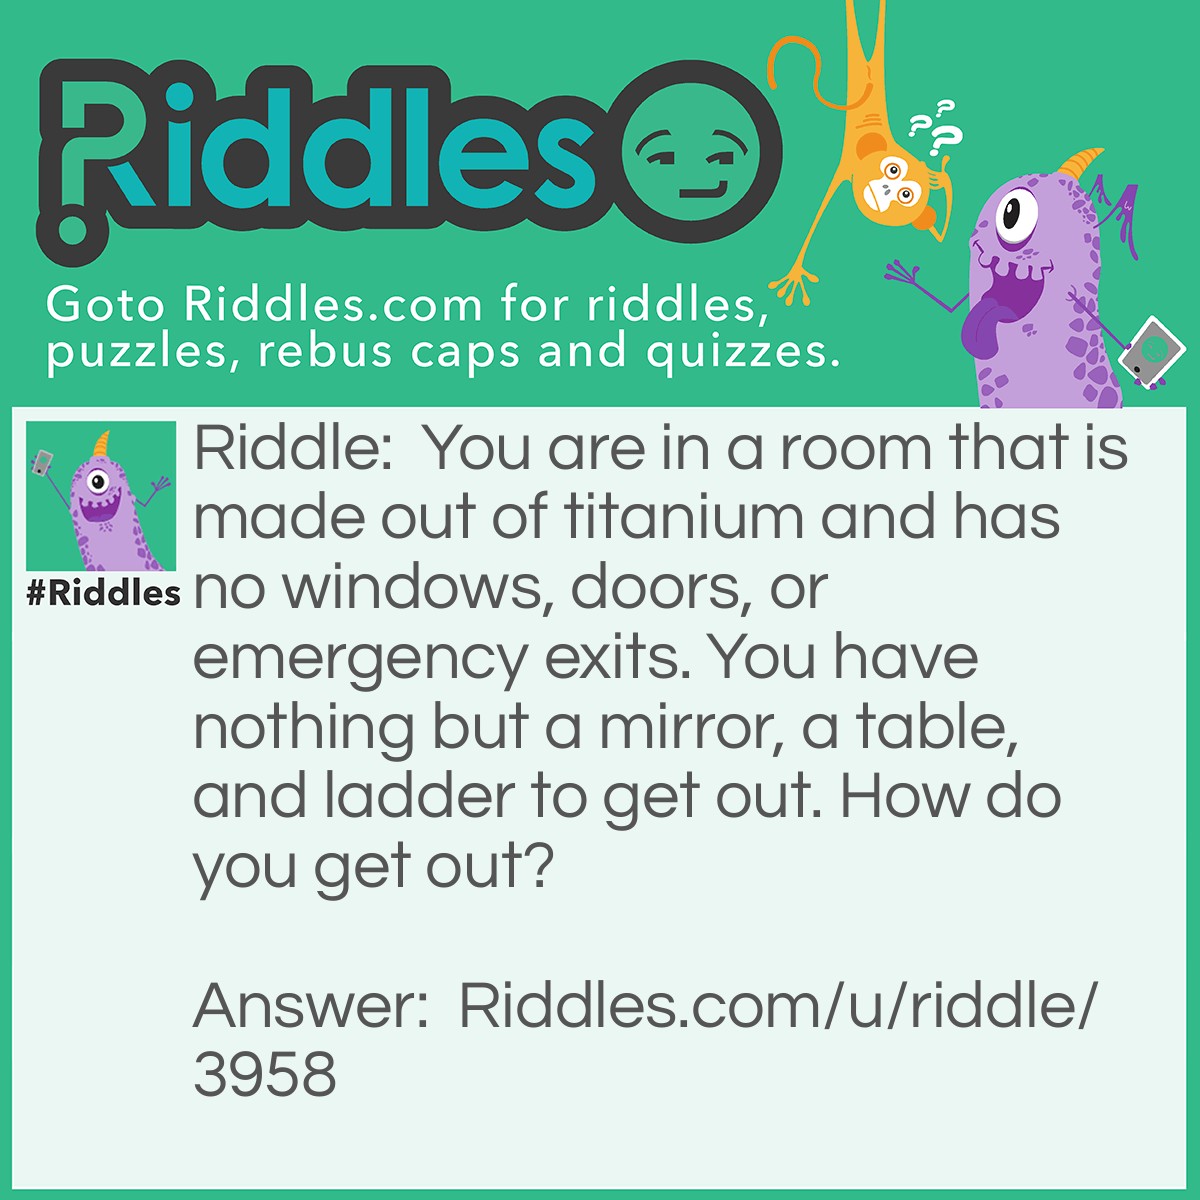 Riddle: You are in a room that is made out of titanium and has no windows, doors, or emergency exits. You have nothing but a mirror, a table, and ladder to get out. How do you get out? Answer: You put the ladder against the wall and climb out of the room. (I never said that the room had a ceiling.) :) :) :)